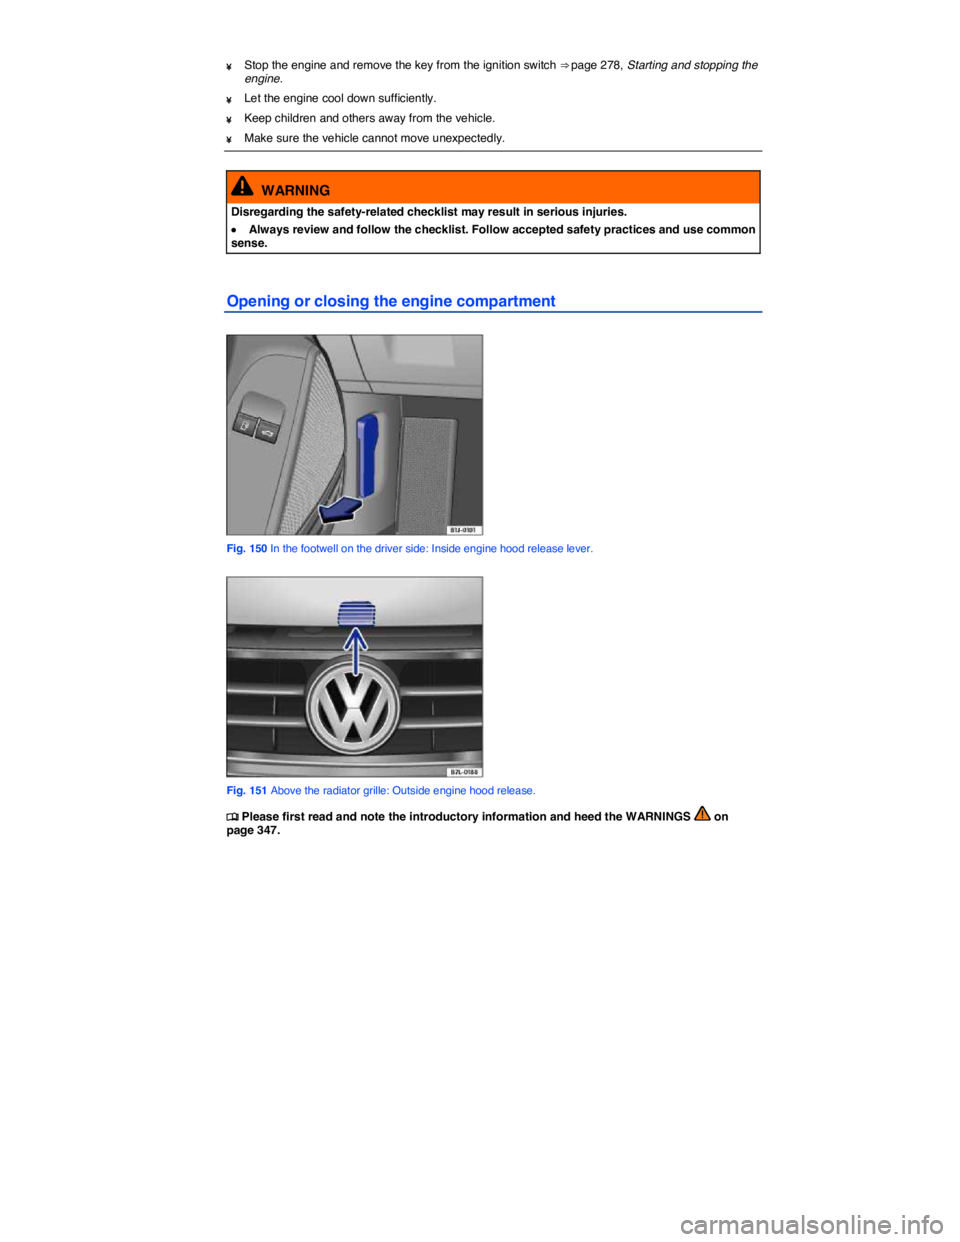 VOLKSWAGEN EOS 2010  Owners Manual  
¥ Stop the engine and remove the key from the ignition switch ⇒ page 278, Starting and stopping the engine. 
¥ Let the engine cool down sufficiently. 
¥ Keep children and others away from the